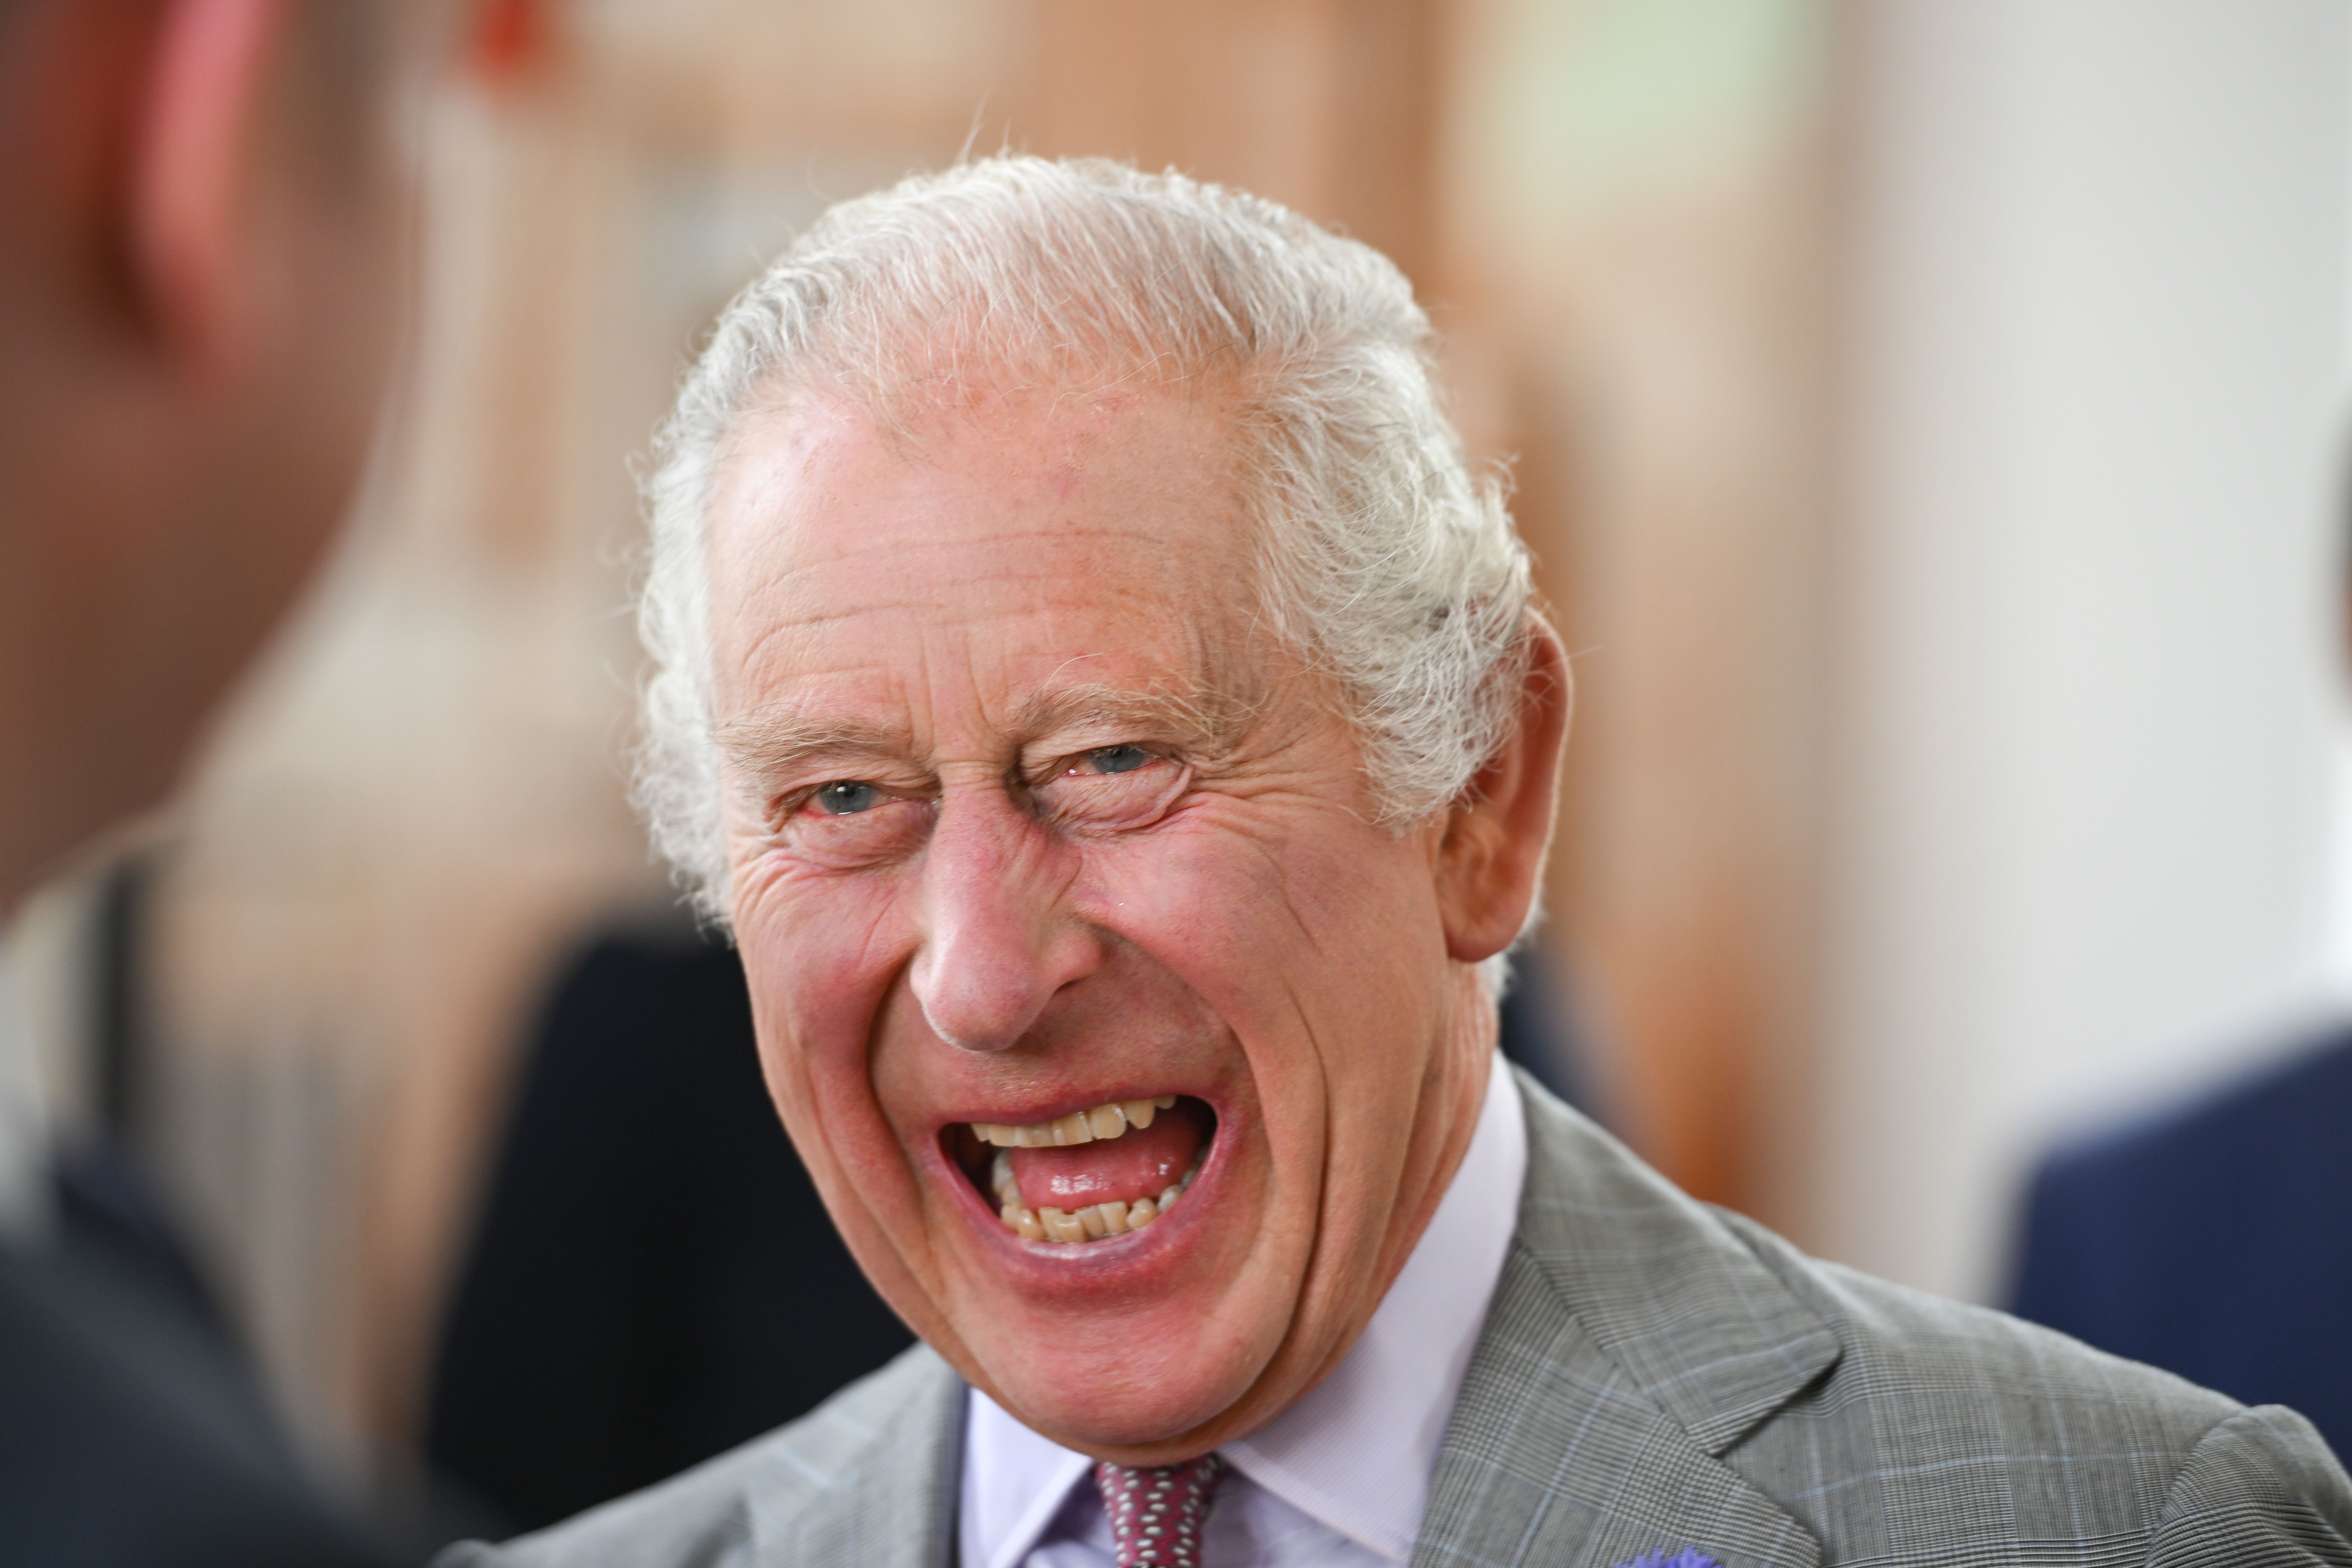 King Charles III laughing during an official visit to Cornwall in St Ives, England on July 13, 2023 | Source: Getty Images